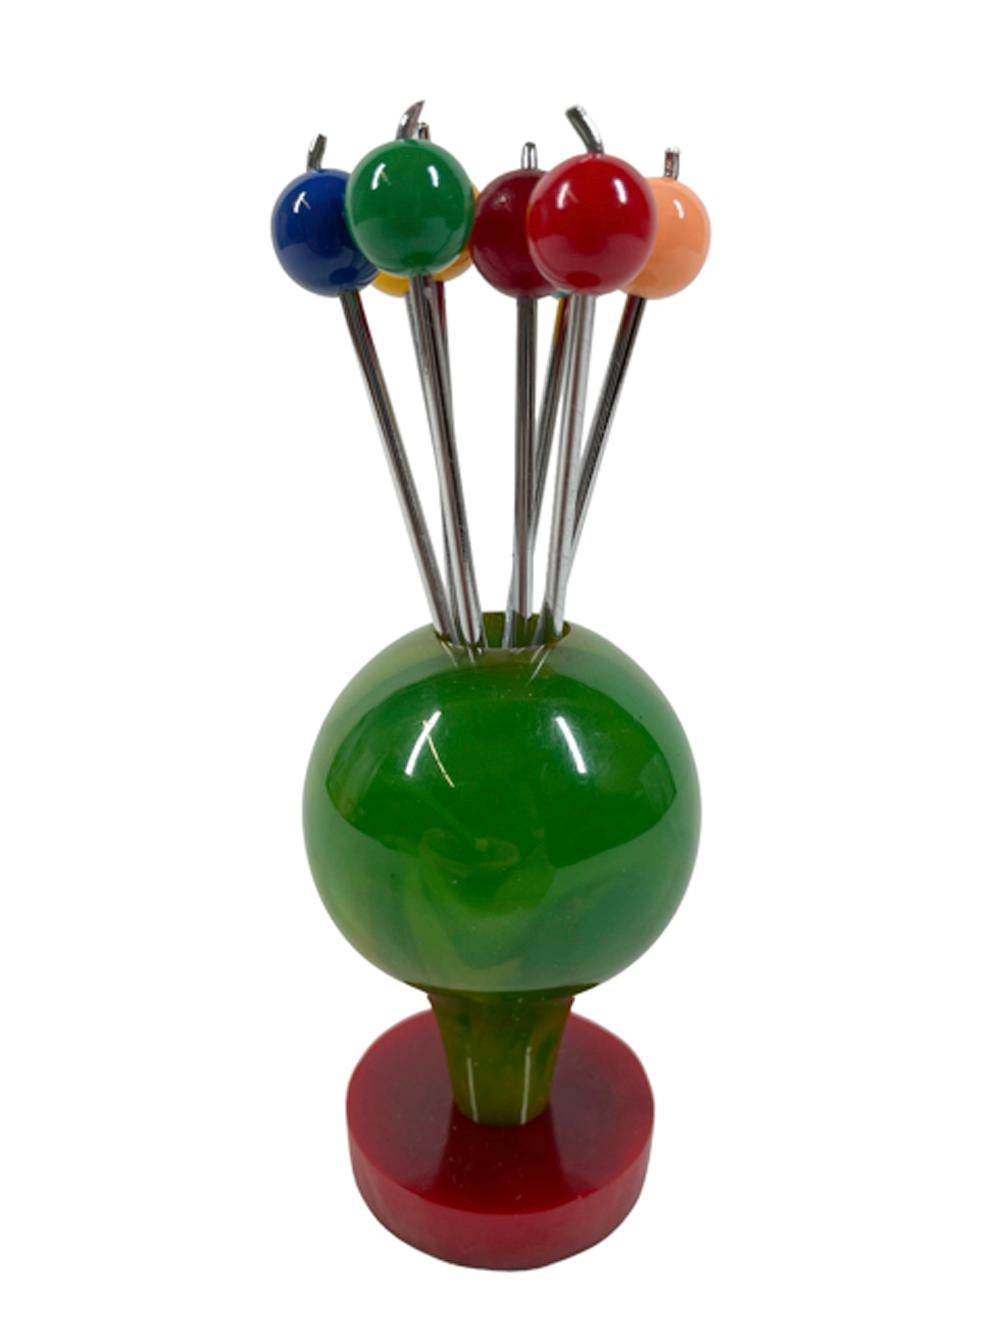 Art Deco Bakelite cocktail picks - eight forked chrome picks displayed as a bunch of balloons, each with a different color ball finial held in a mottled jade green balloon form stand rising from a red Bakelite disk-form base.